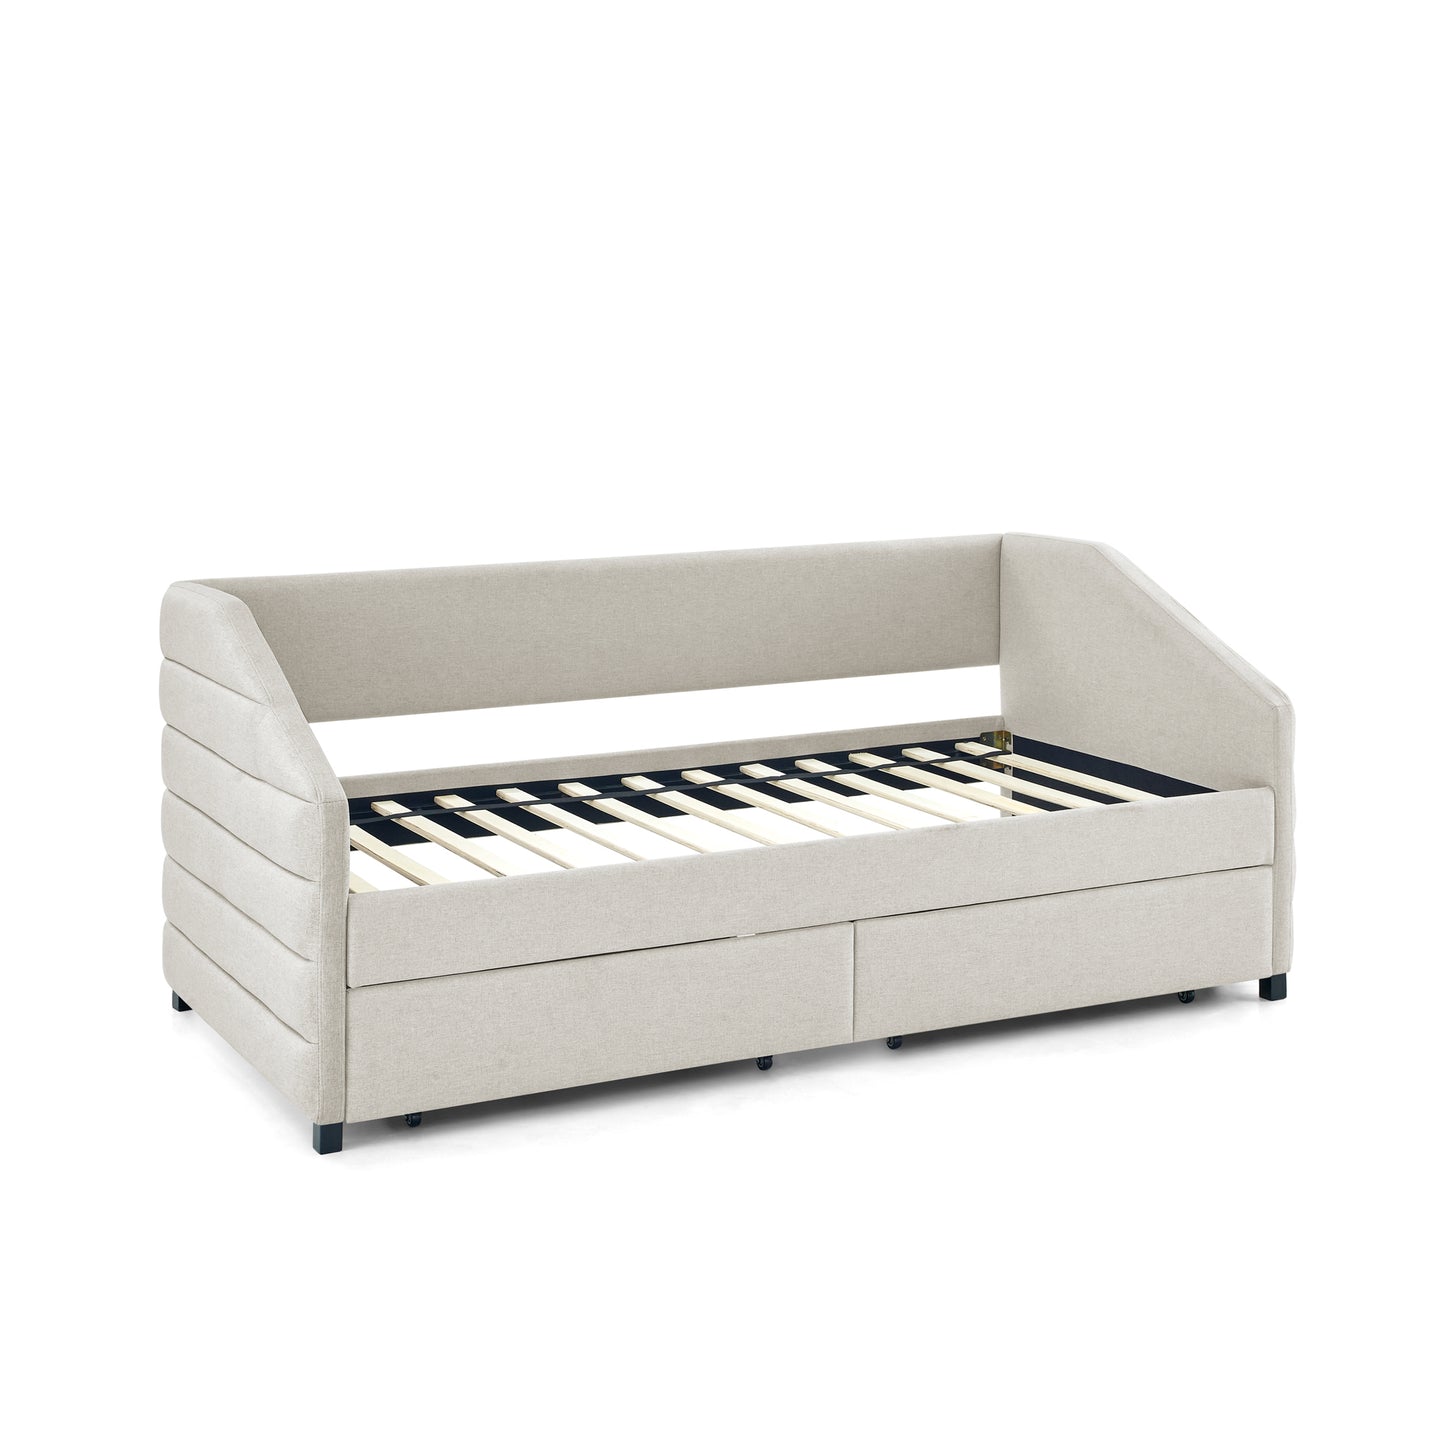 Twin Size Daybed with Two Drawers Trundle Upholstered Tufted Sofa Bed, Linen Fabric, Beige (82.5"x42.5"x34")